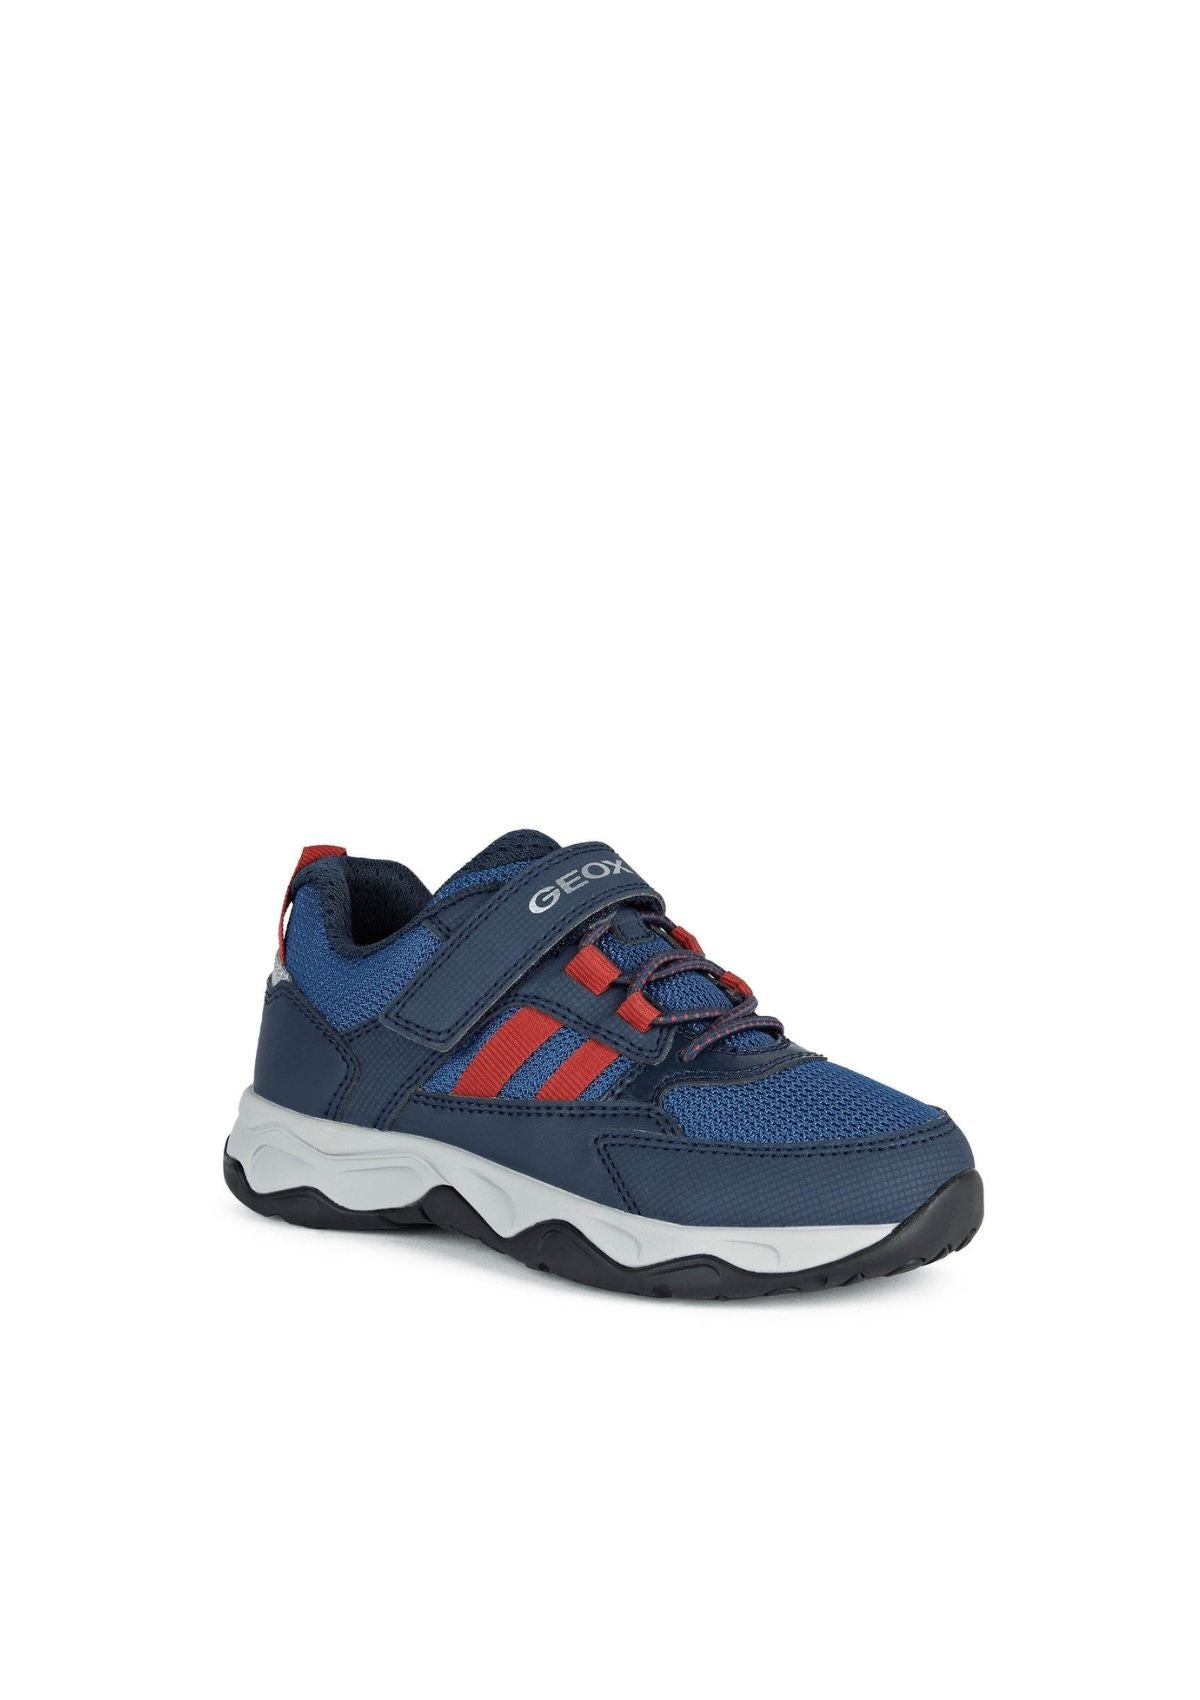 Geox Boys CALCO Navy Red front